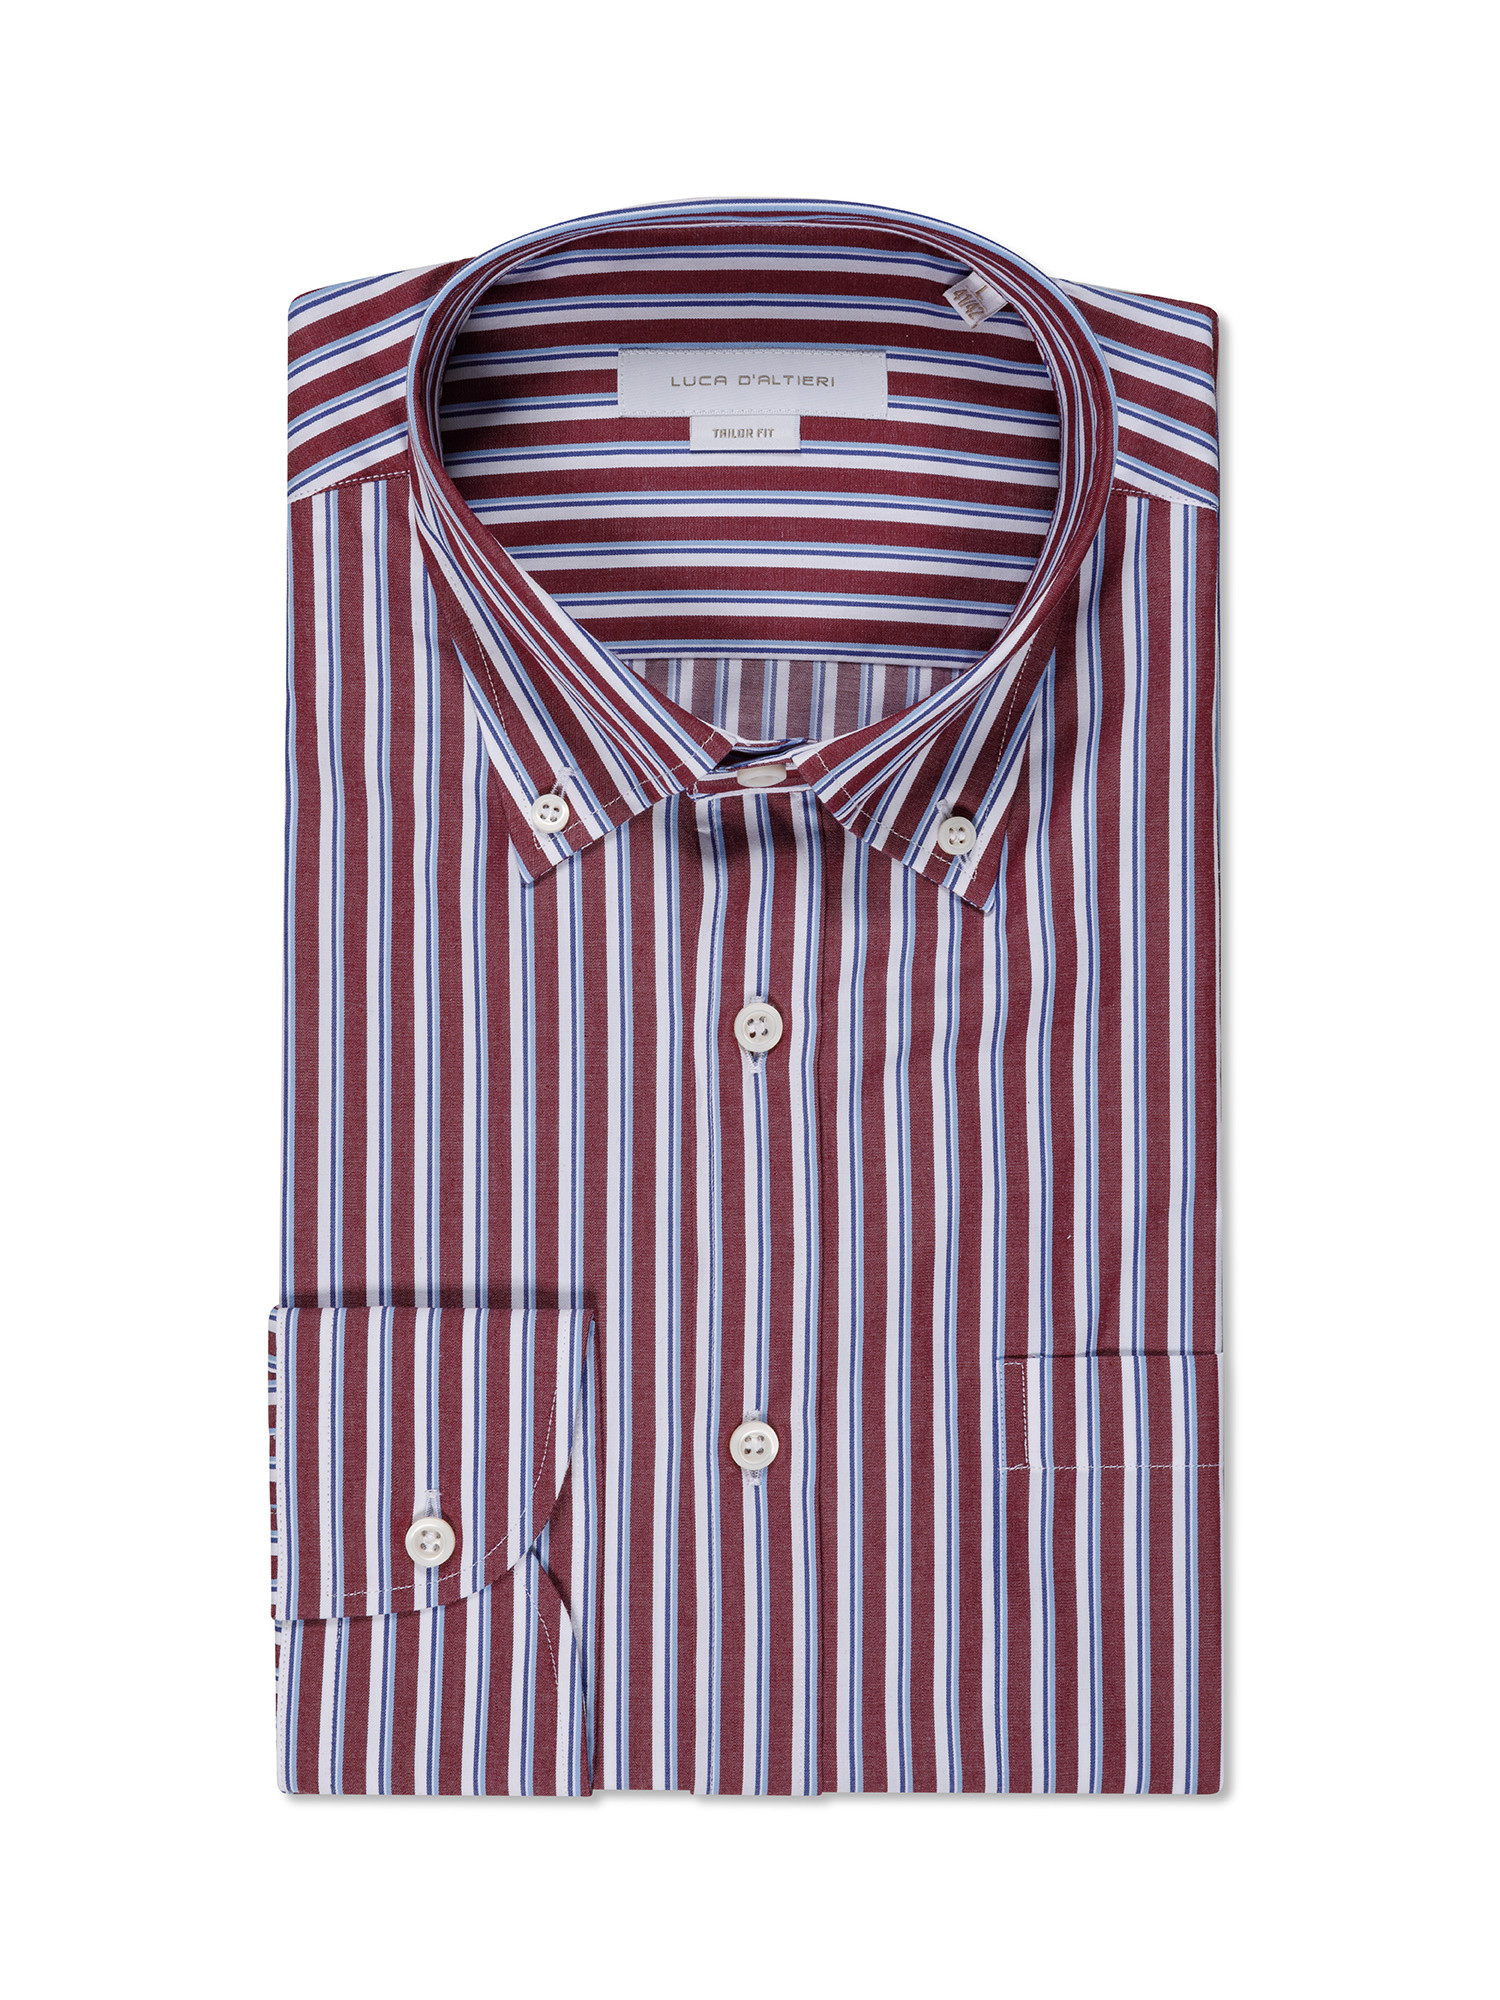 Luca D'Altieri - Tailor fit striped shirt in pure cotton, Red Bordeaux, large image number 0